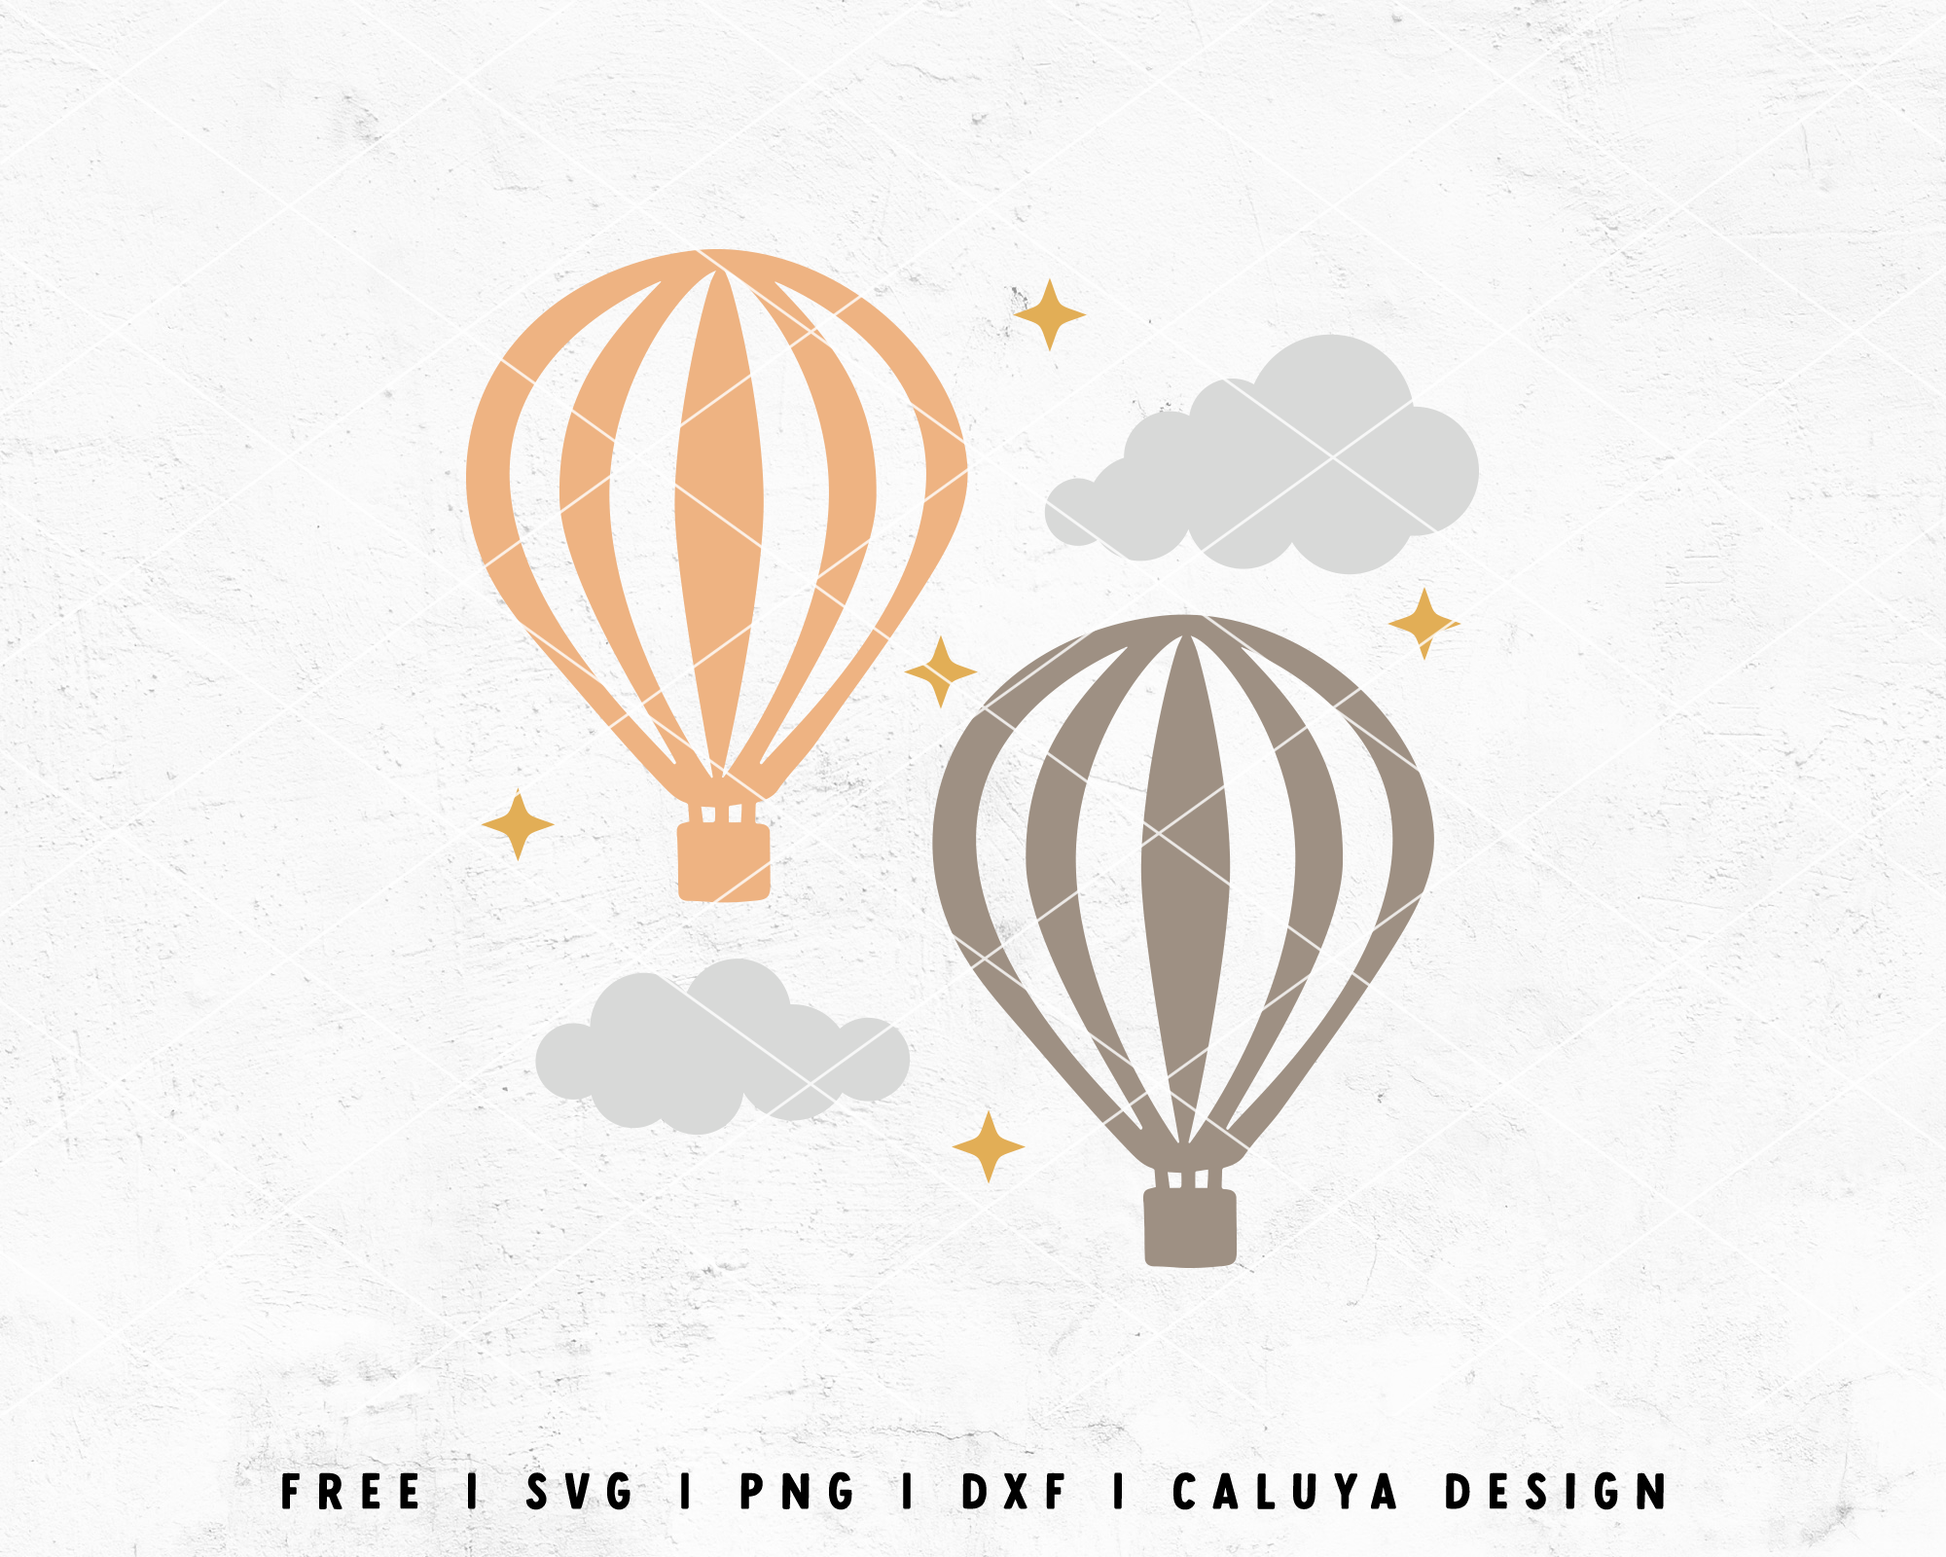 FREE Hot Air Balloon SVG | Sky SVG | Baby SVG Cut File for Cricut, Cameo Silhouette | Free SVG Cut File